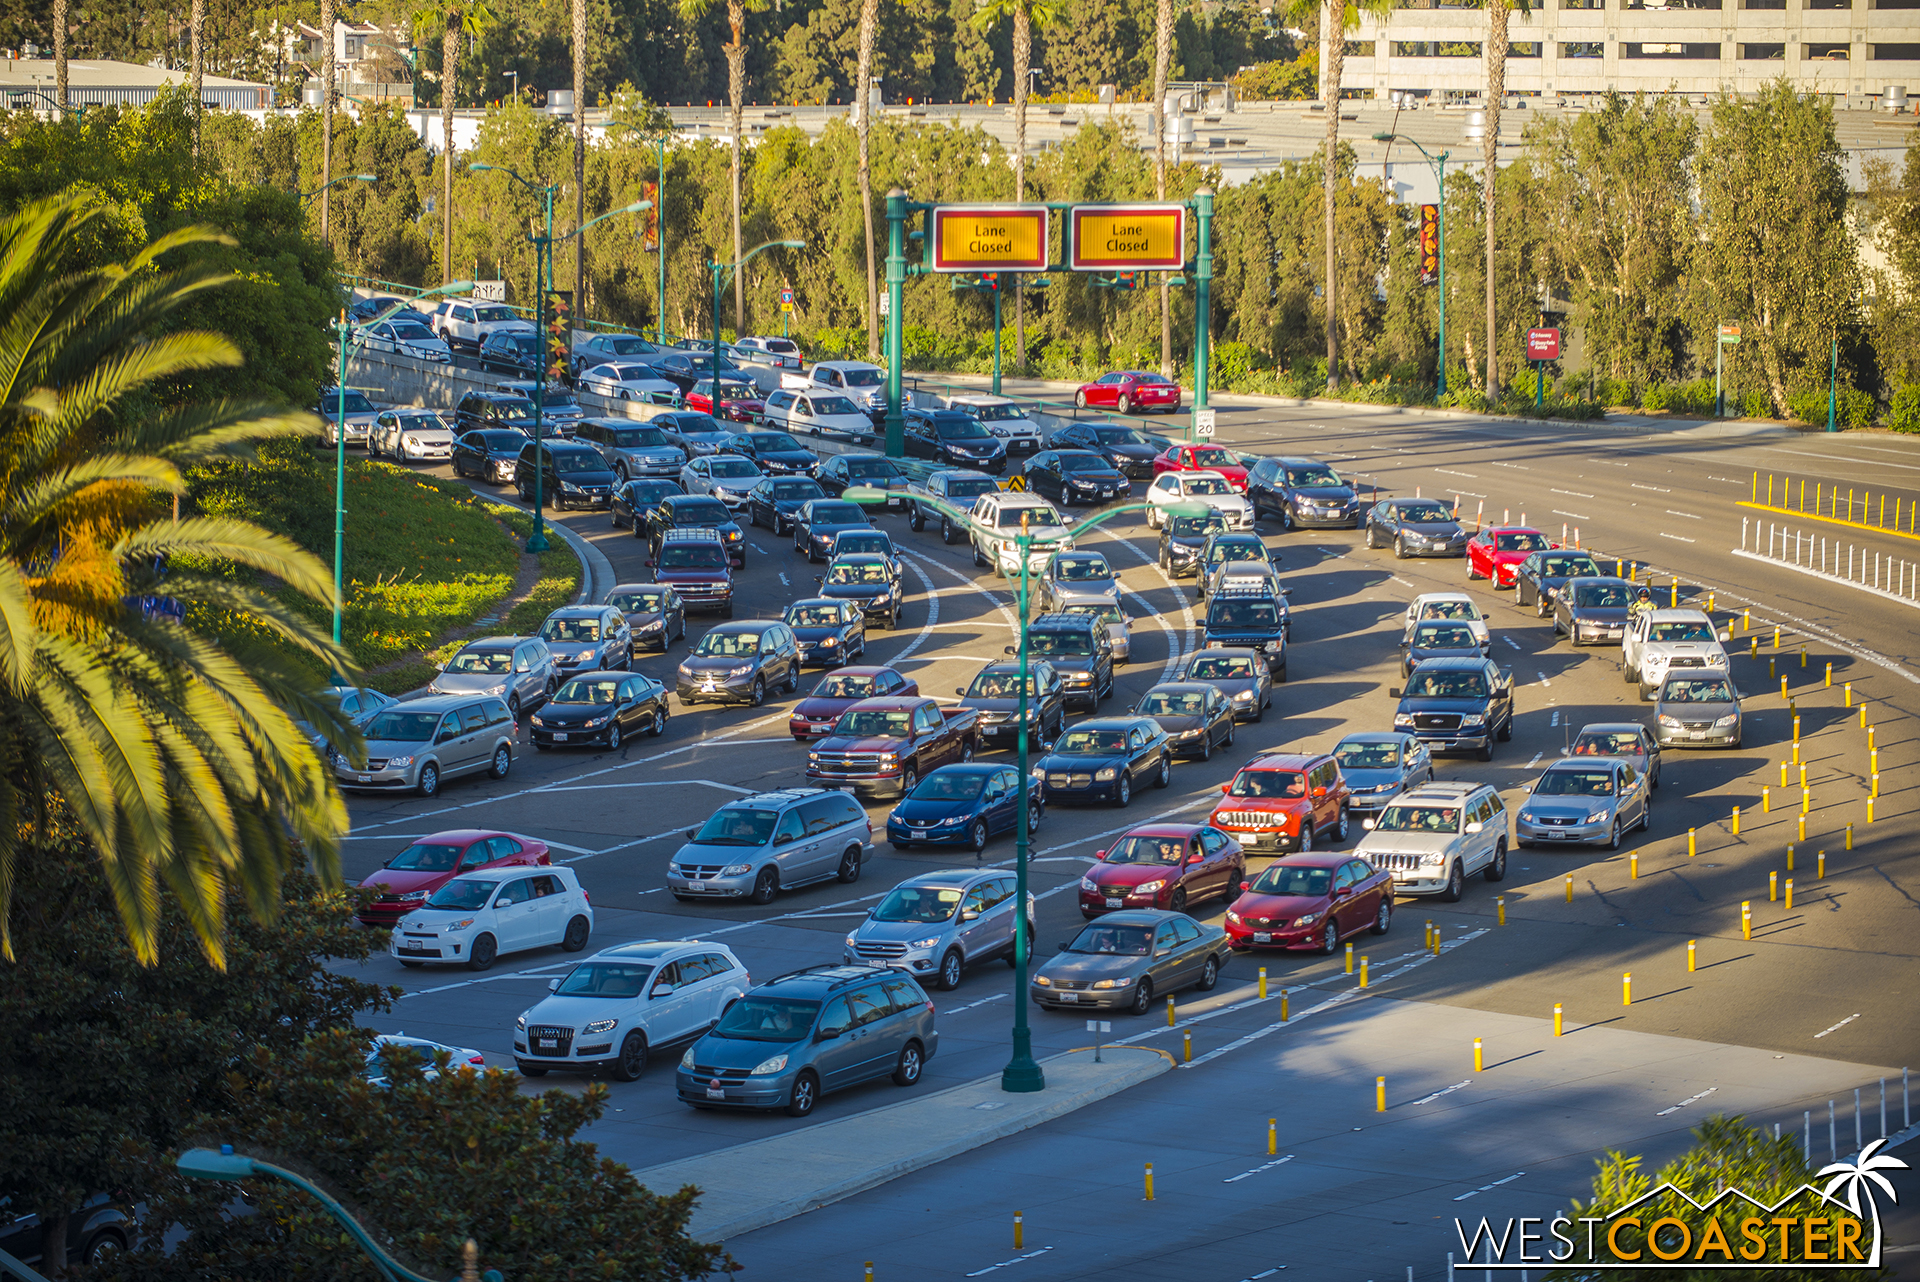  Remember when I said get to the parks early for Mickey's Halloween Party?&nbsp; This is why.&nbsp; At 4:00pm of Friday, the parking structure was backed up out of the structure.&nbsp; An hour later, it looked like this, with cars backed up past Ball